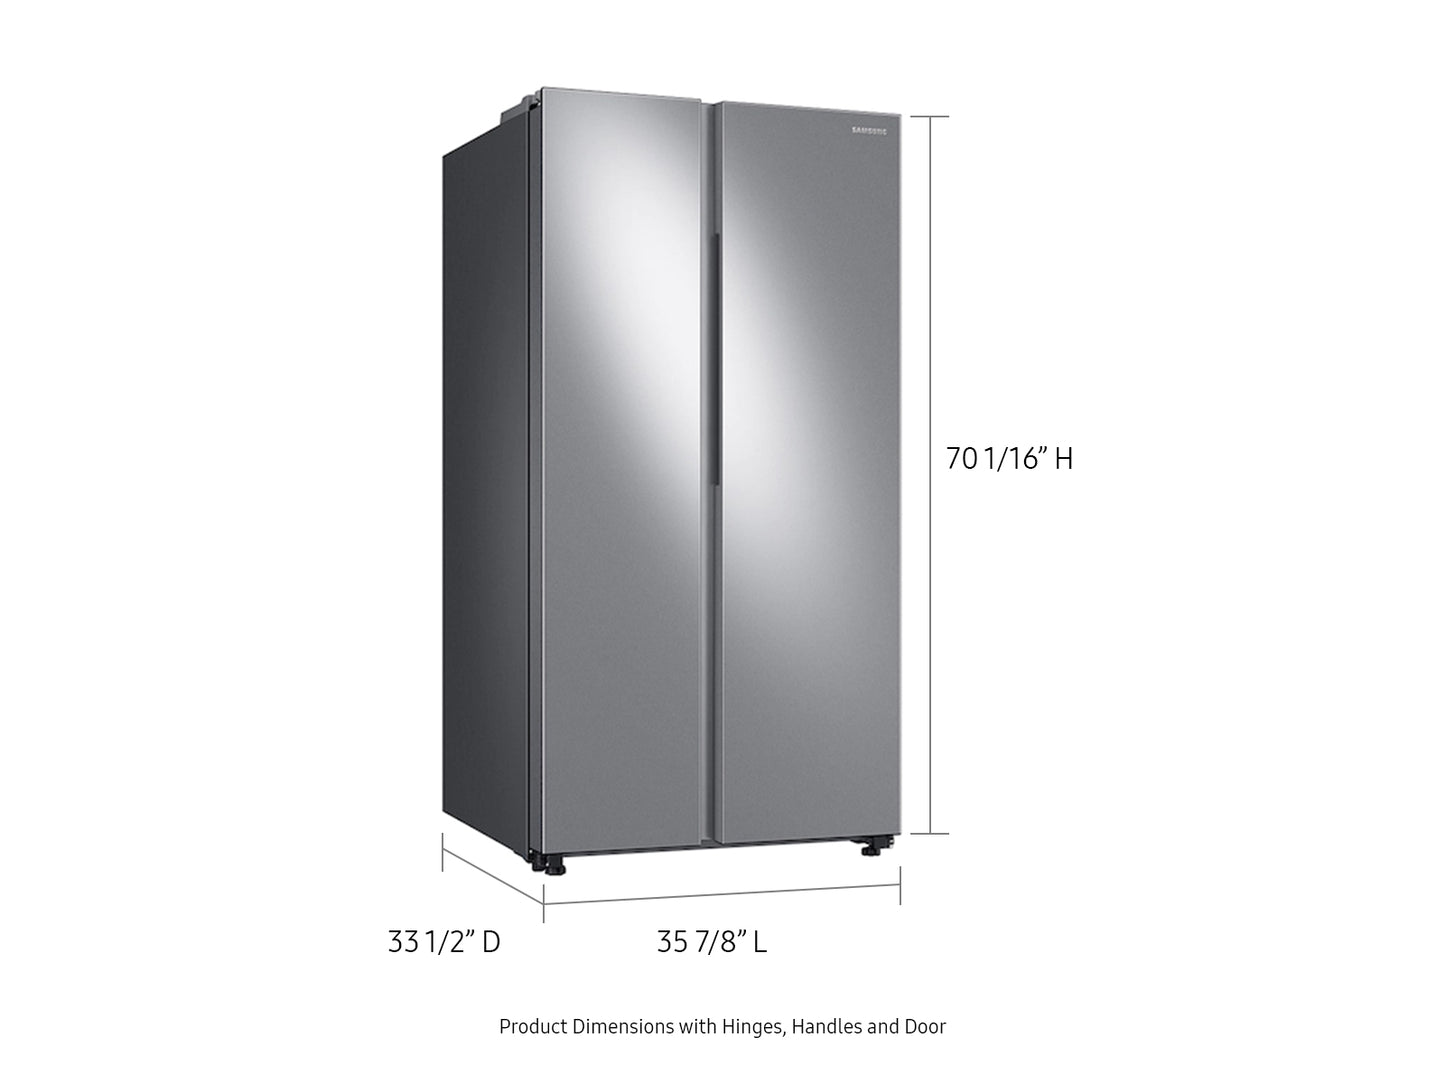 Samsung 28 cu. ft. Smart Side-by-Side Refrigerator in Stainless Steel